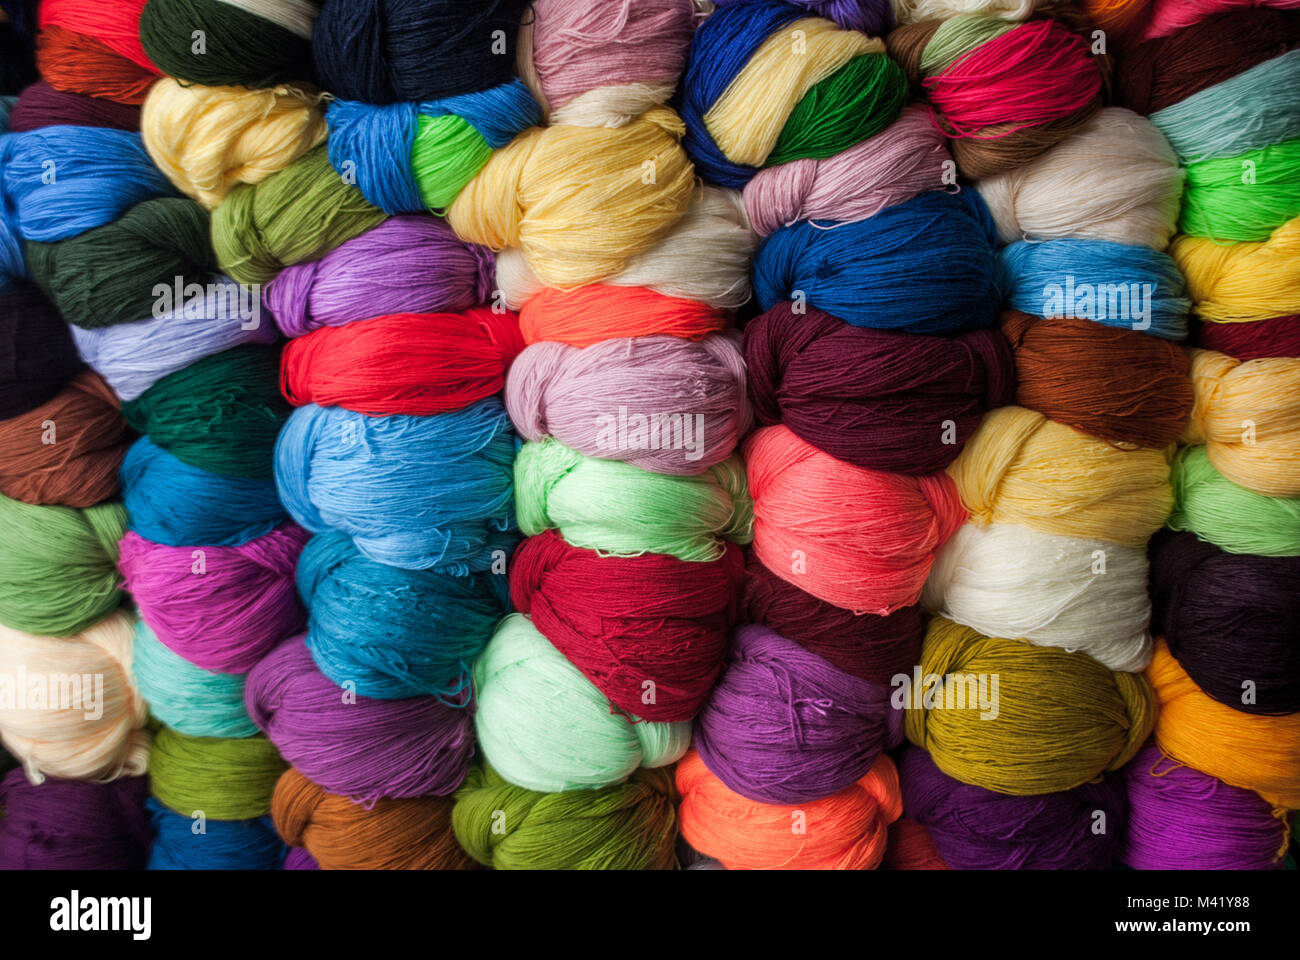 Lots of colorful balls of wool arranged together in a market Stock Photo